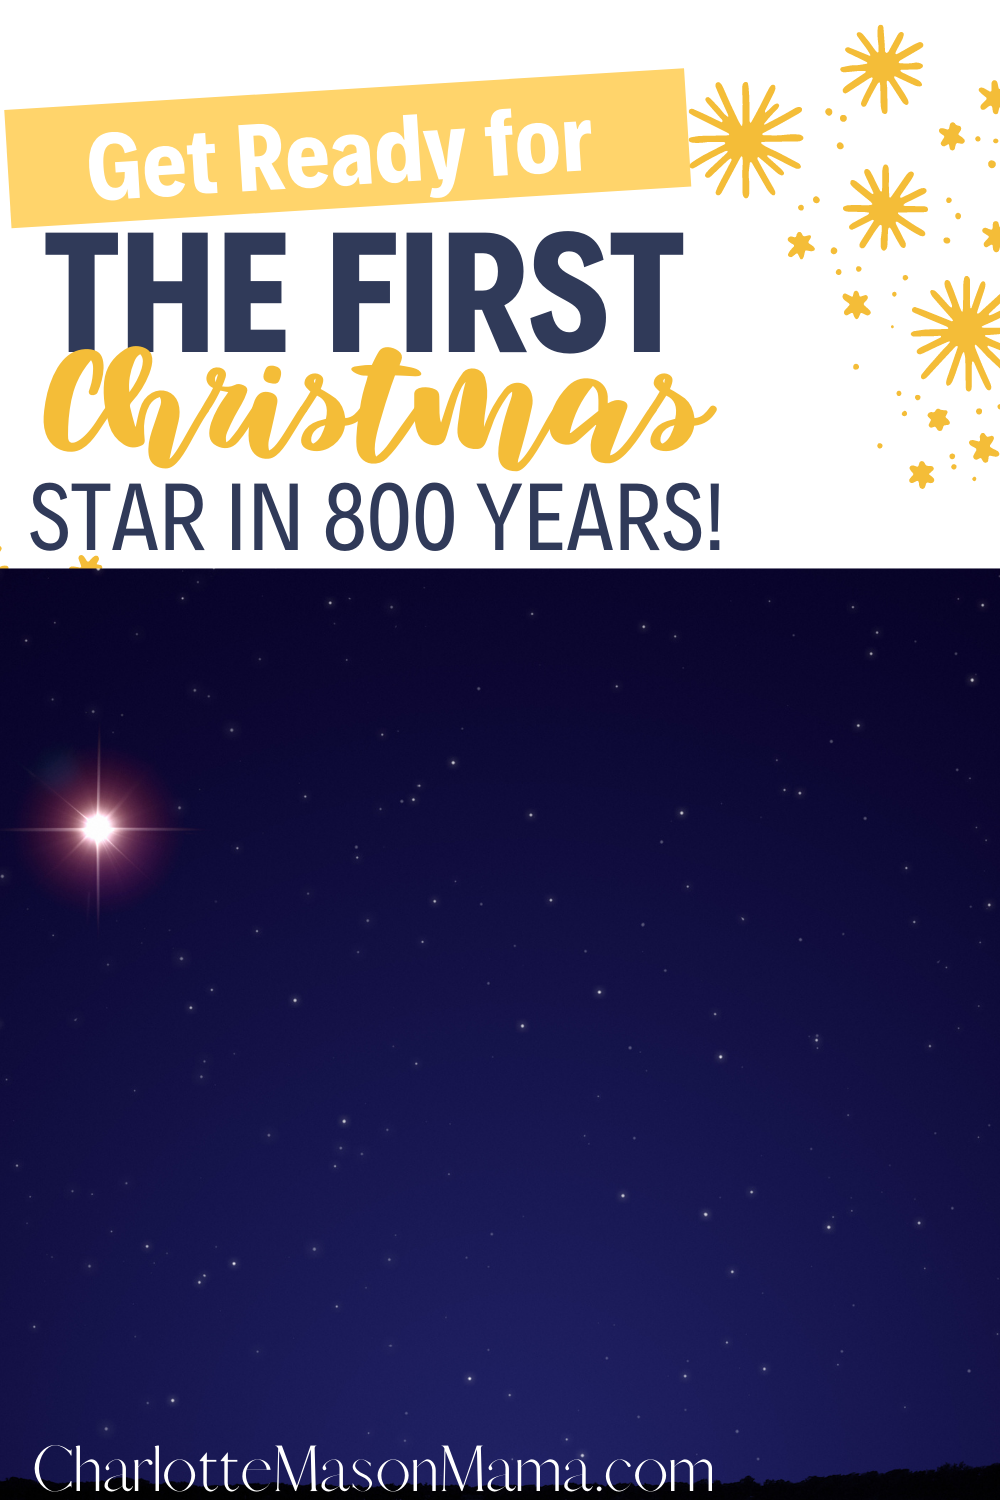 Get Ready for the FIRST Christmas Star in 800 YEARS